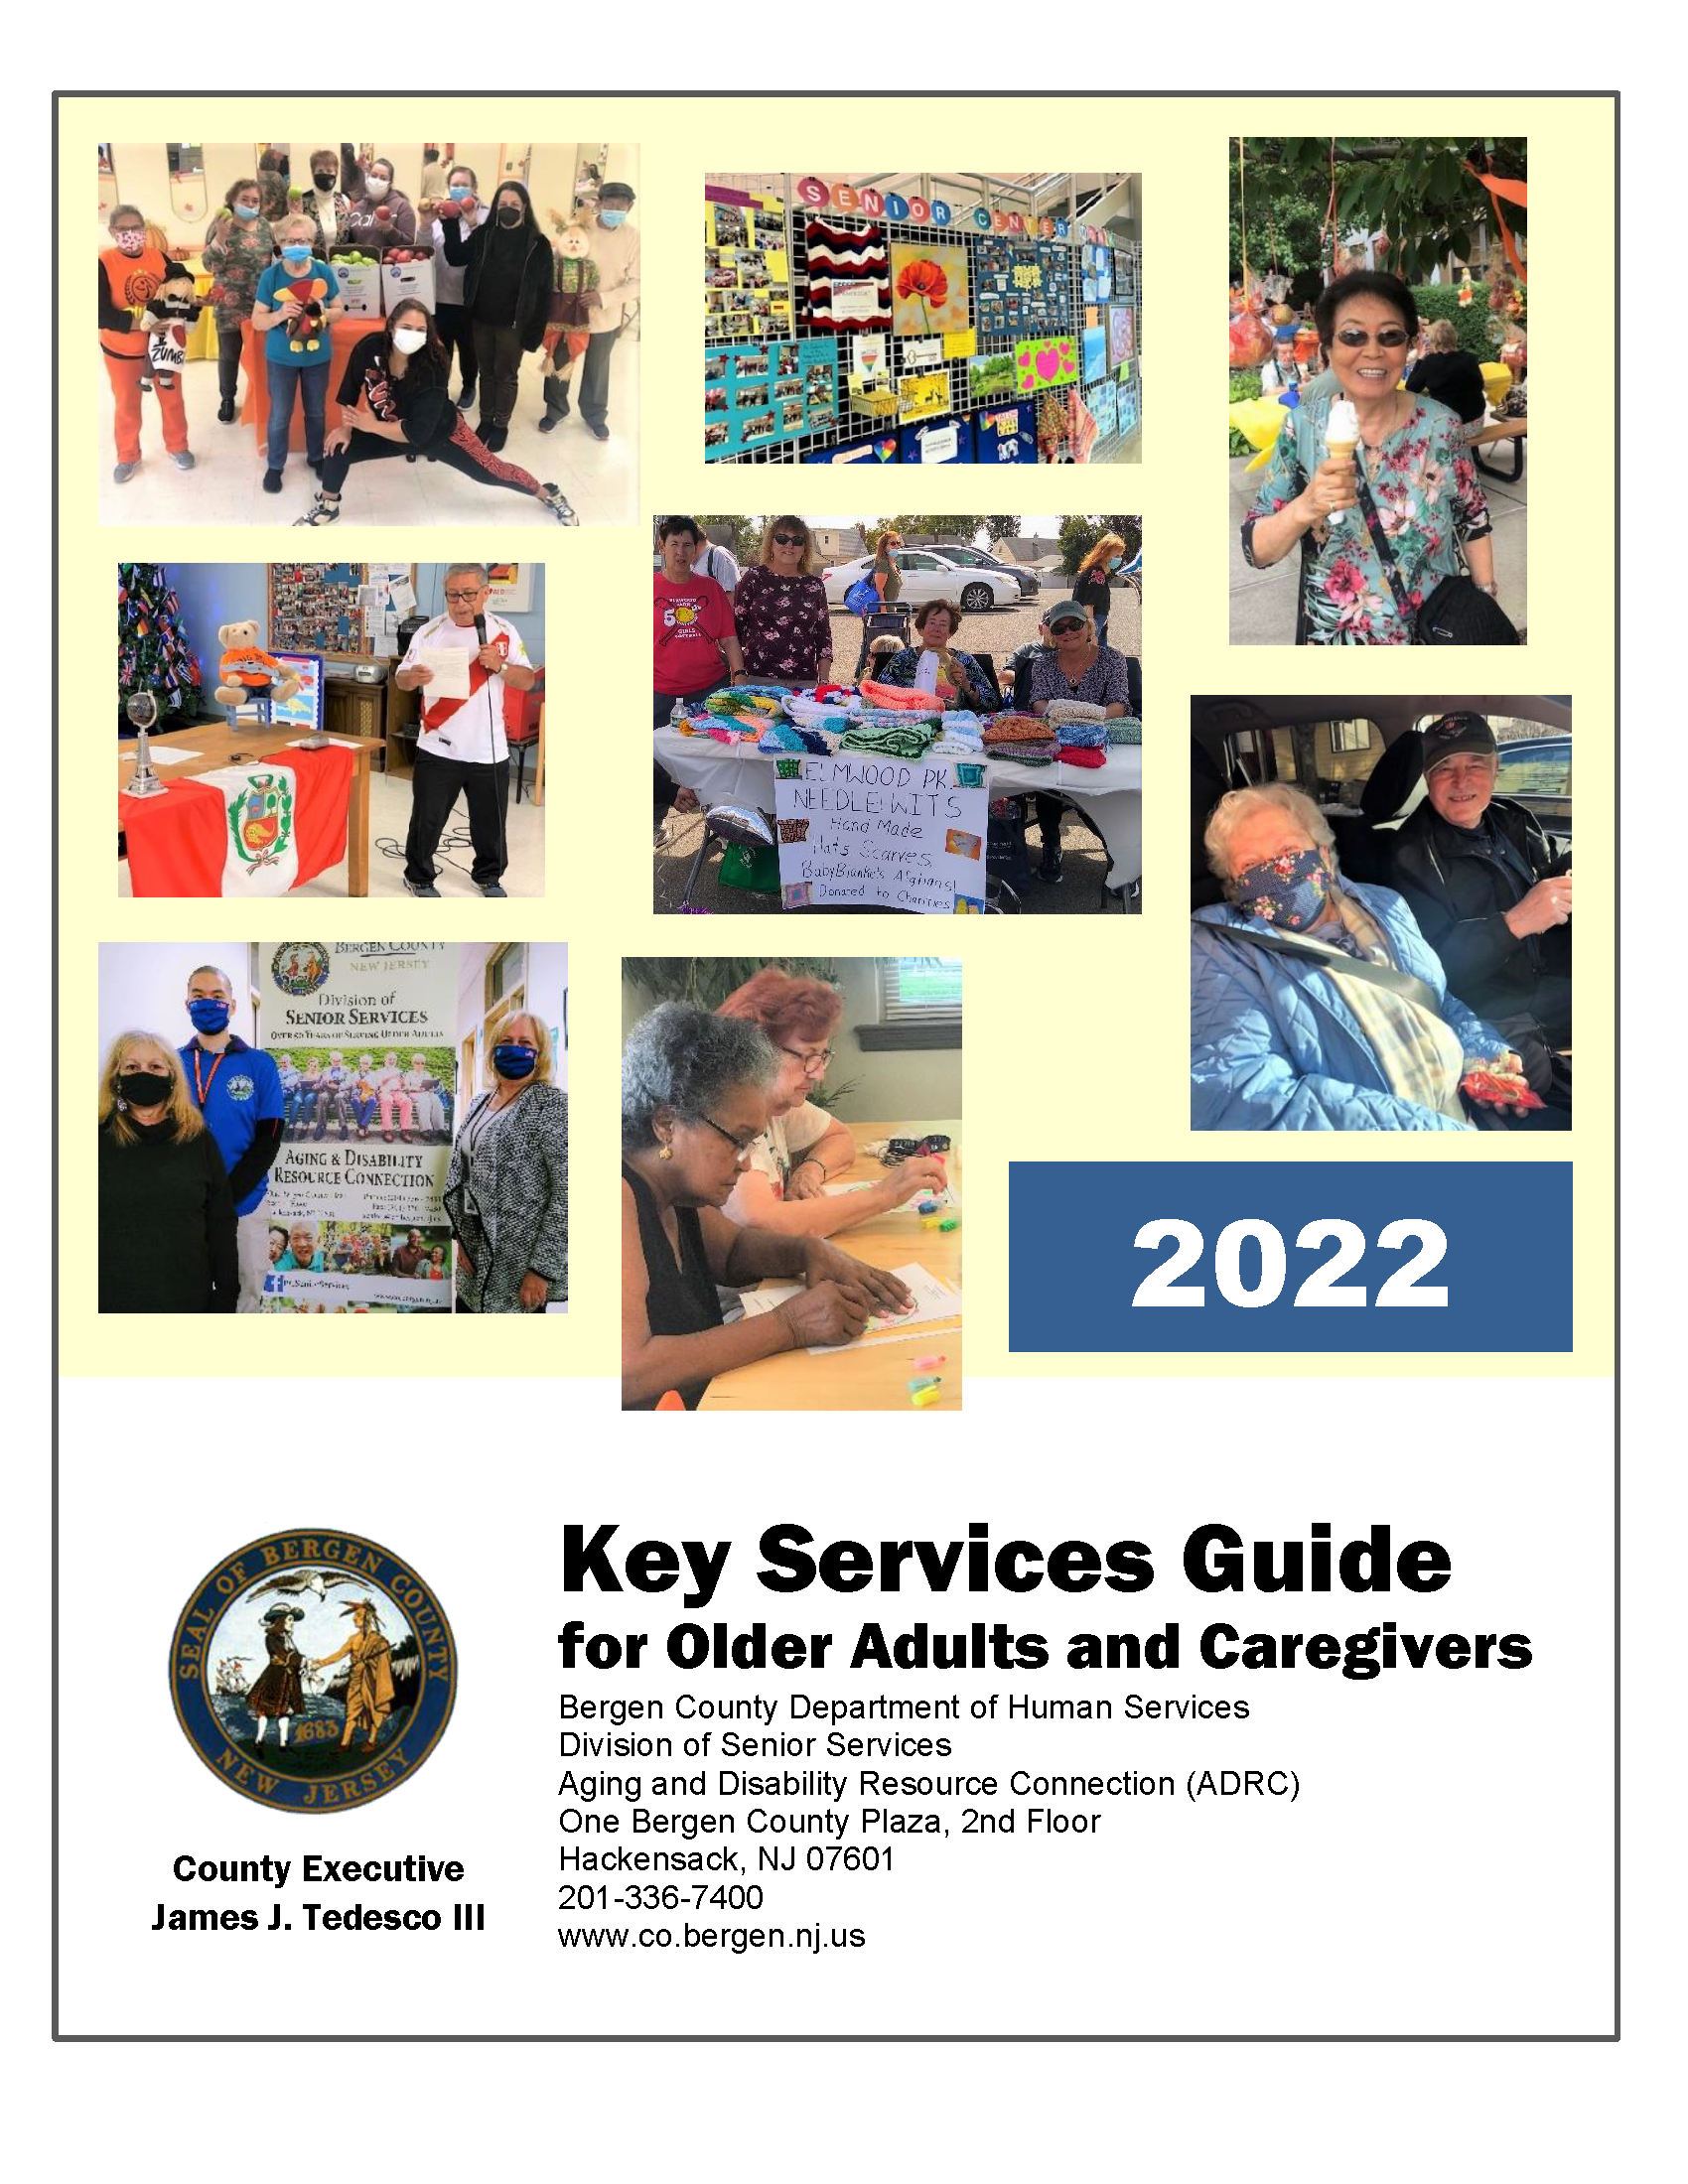 Key Services Guide for Older Adults and Caregivers